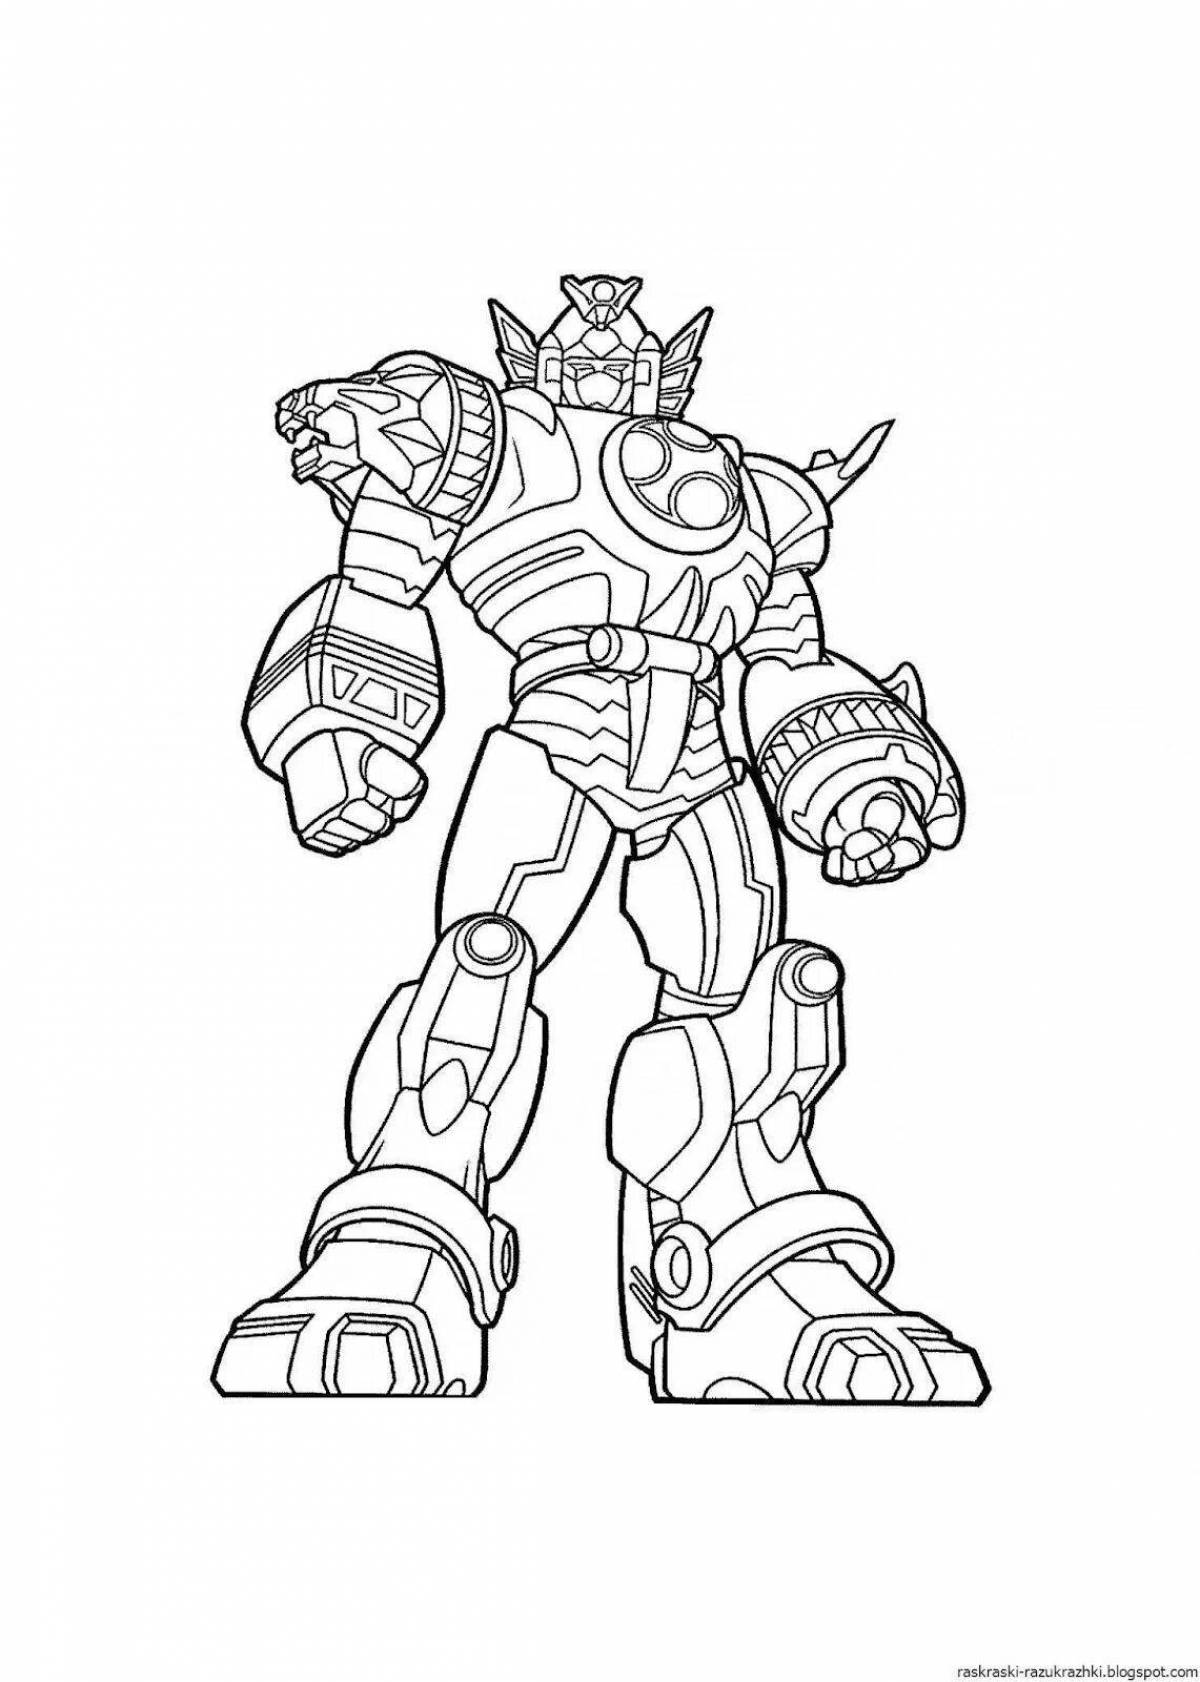 Playful fighters coloring page